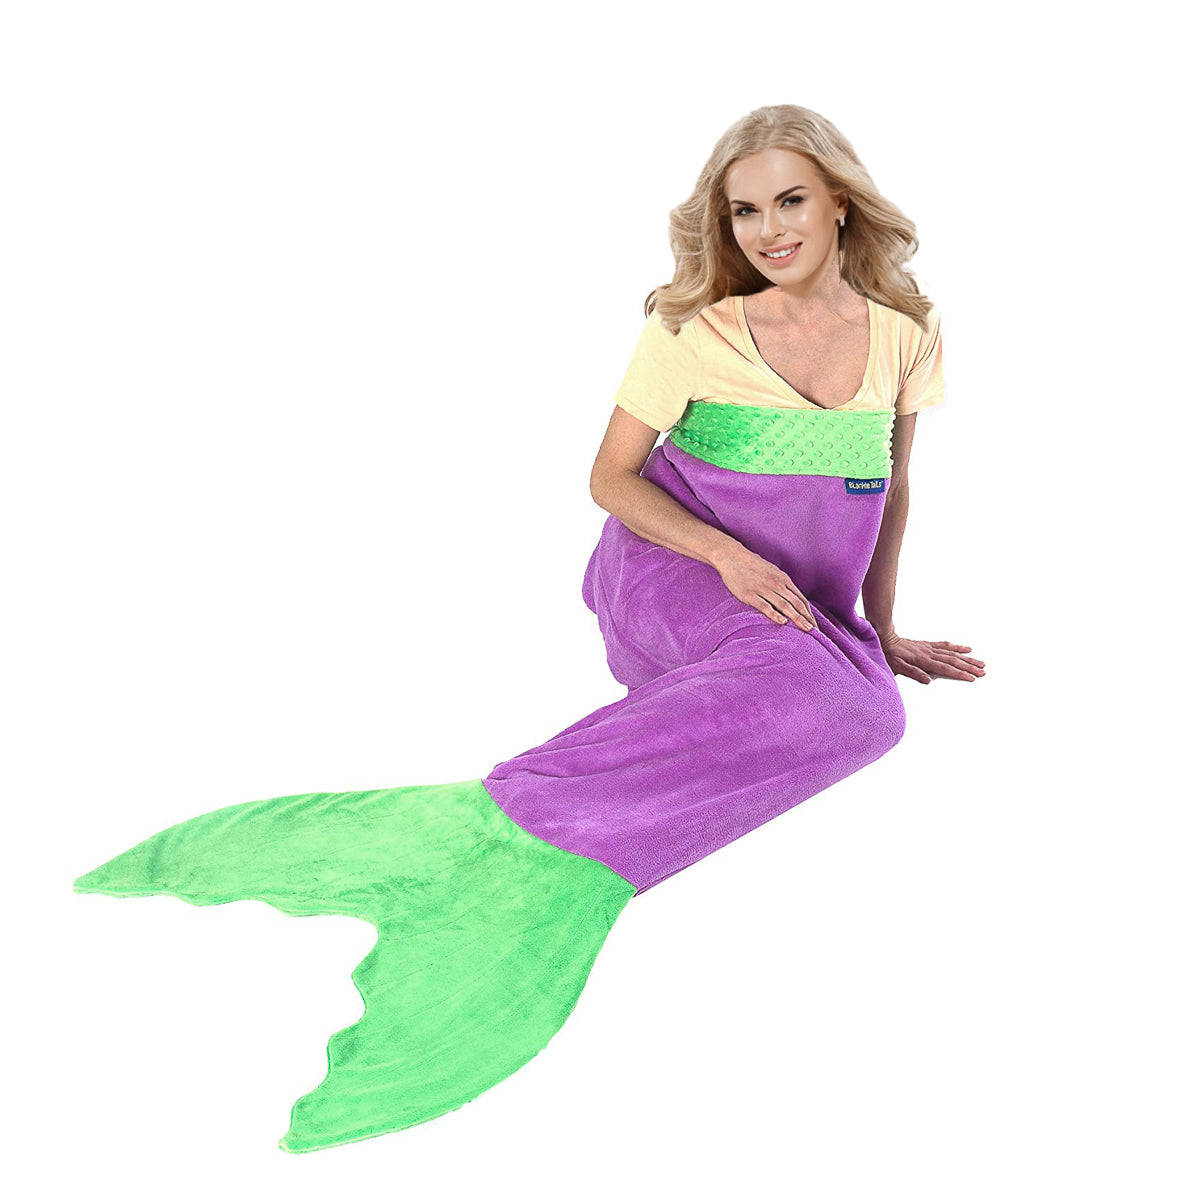 The Original Mermaid Blanket For Kids & Adults By Blankie Tails